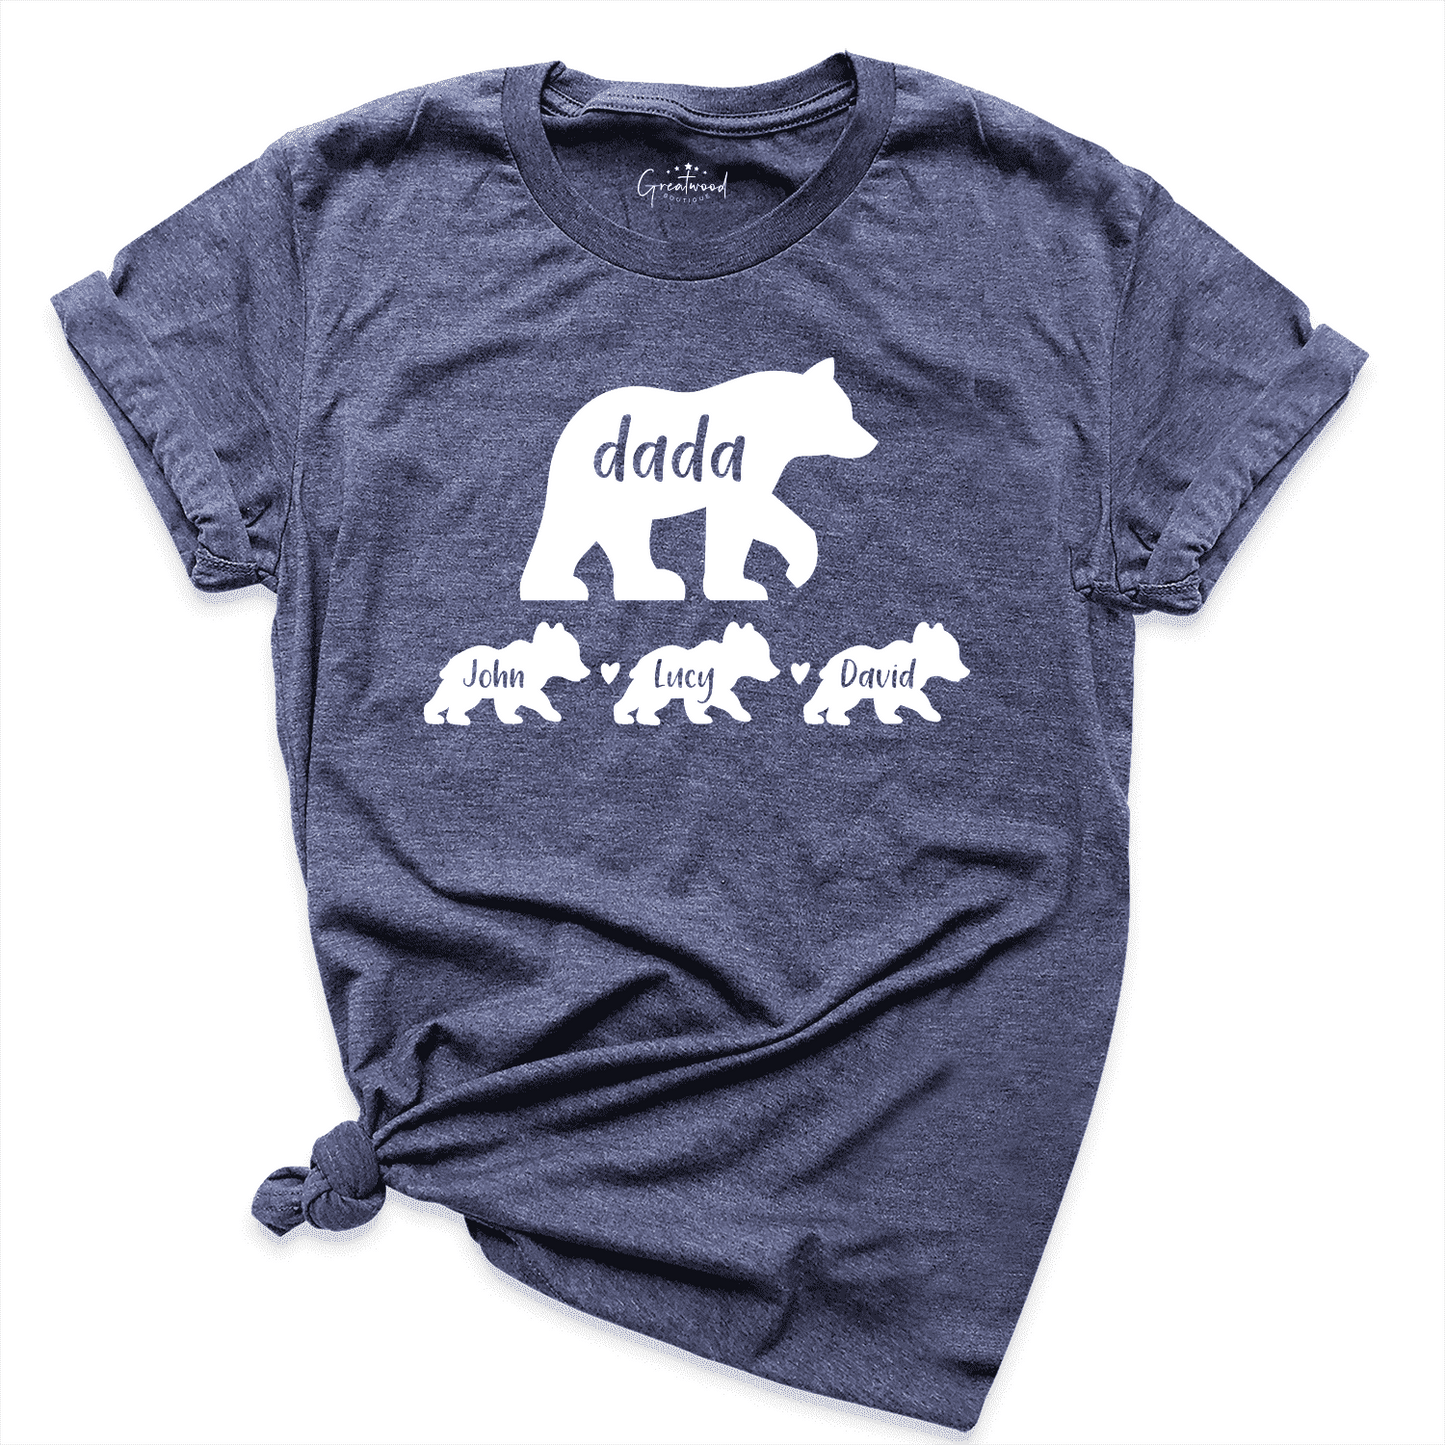 Personalized Dada and Kids Bear Shirt Navy - Greatwood Boutique